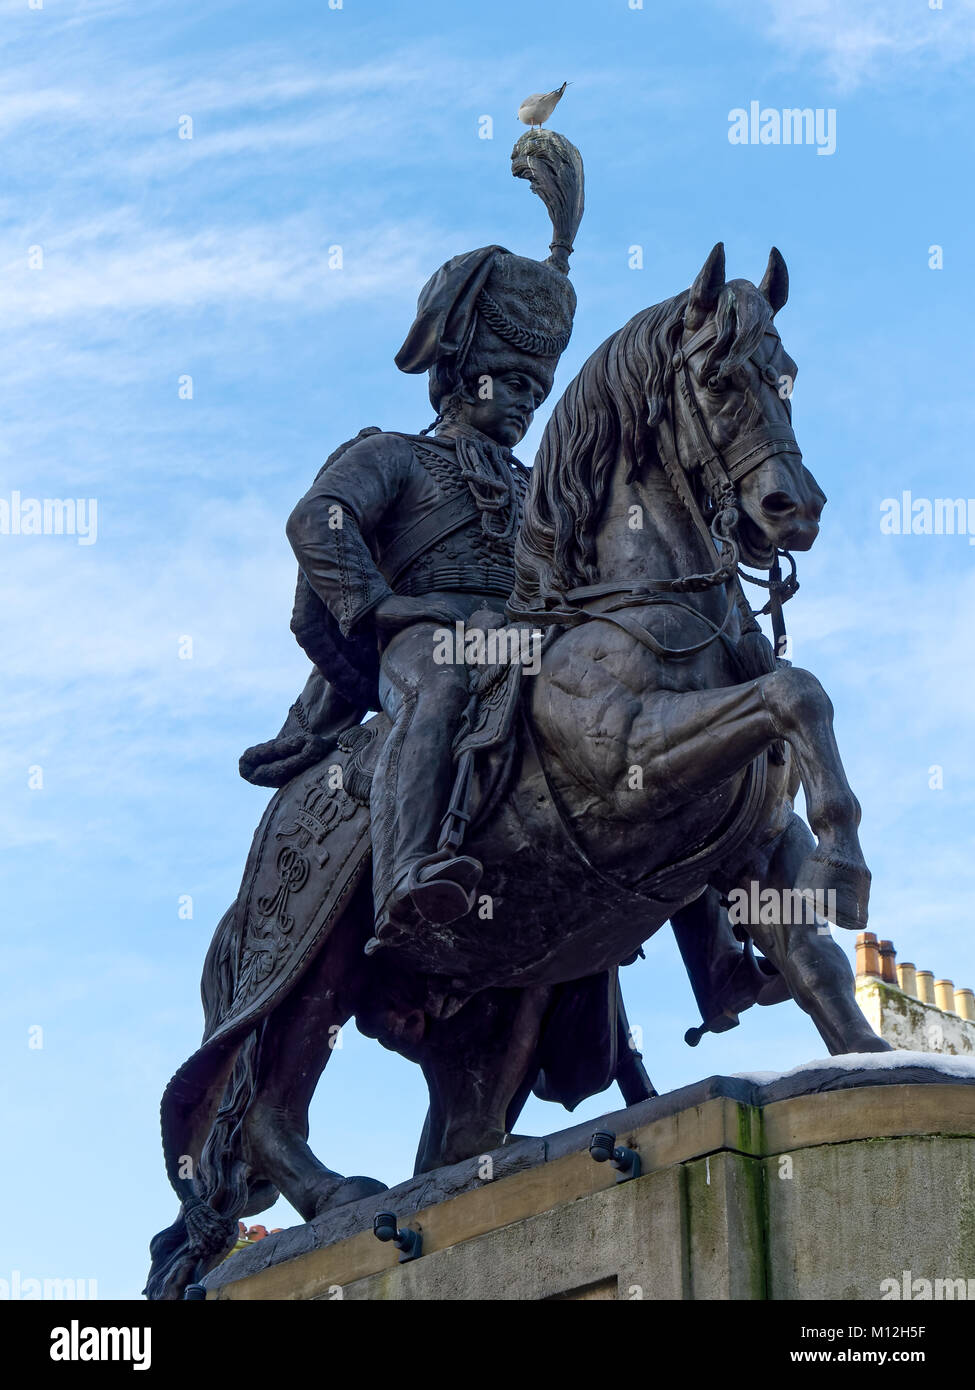 DURHAM, COUNTY DURHAM/UK - JANUARY 19 : Lord Londonderry Statue in Market Place Square in Durham, County Durham on January 19, 2018 Stock Photo